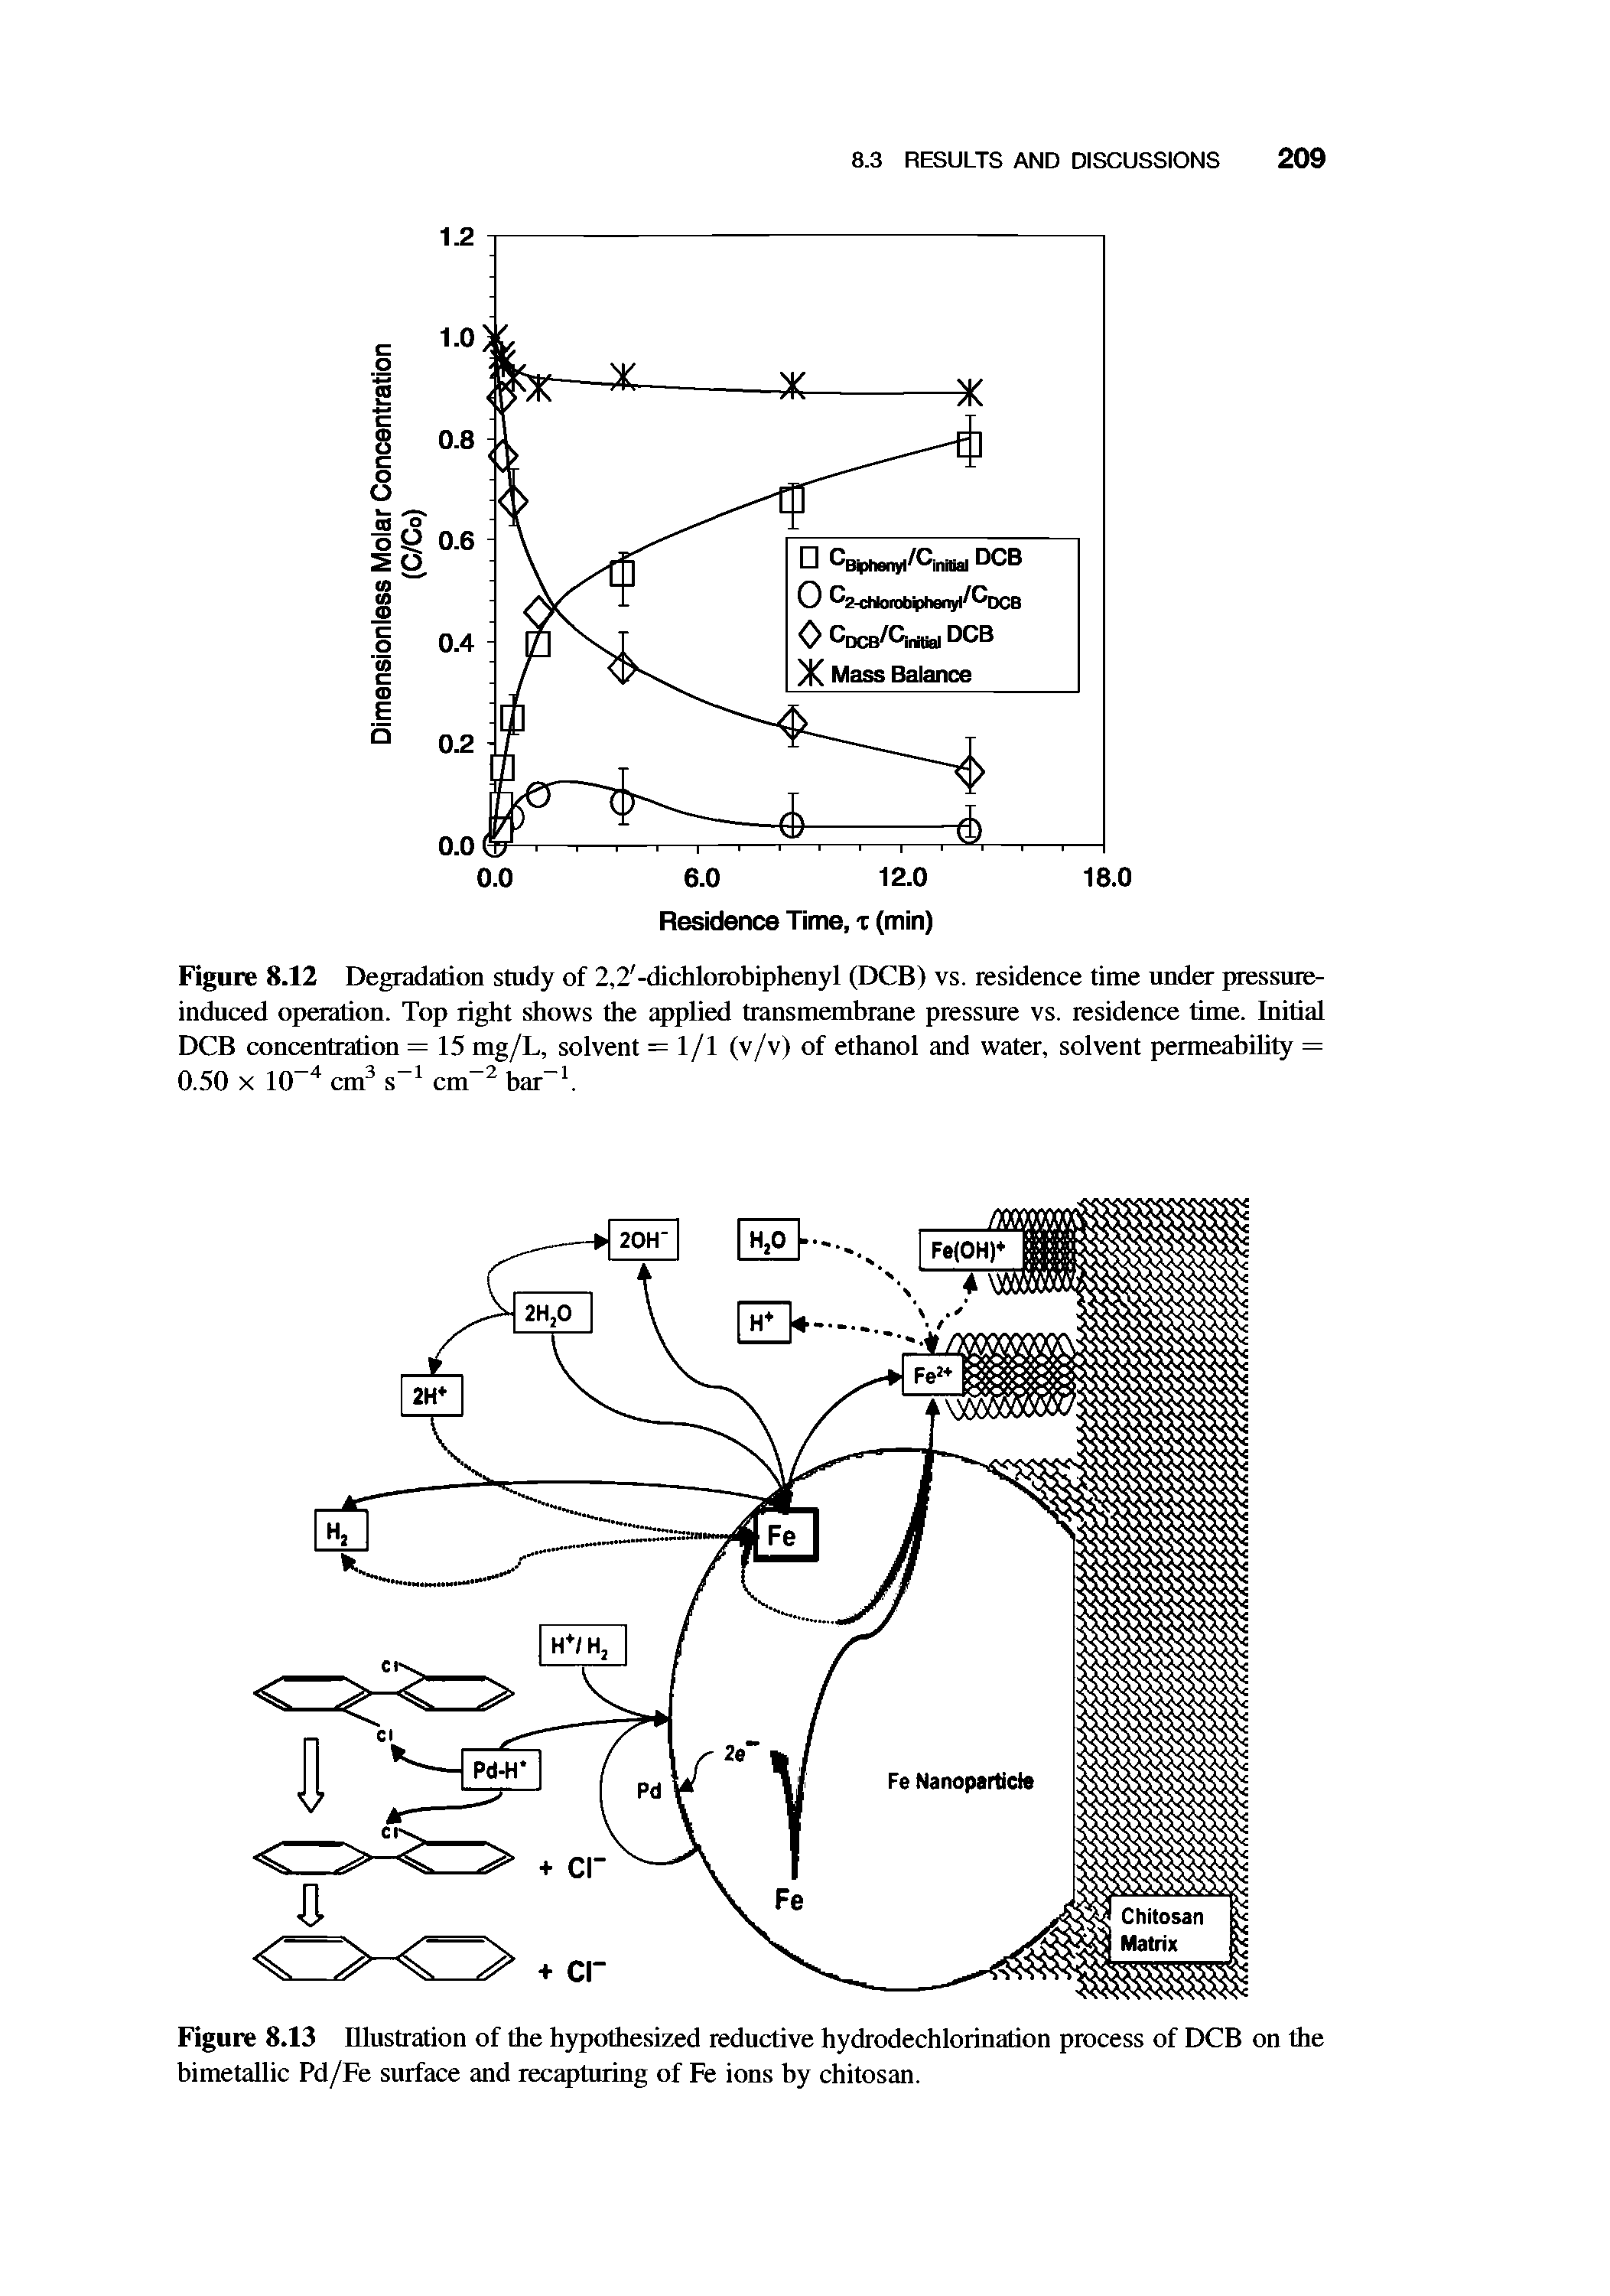 Figure 8.12 Degradation study of 2,2 -dichloiobiphenyl (DCB) vs. residence time under pressure-induced operation. Top right shows the applied transmembrane pressure vs. residence time. Initial DCB concentration = 15 mg/L, solvent =1/1 (v/v) of ethanol and water, solvent permeability = 0.50 X 10 cm s cm bar. ...